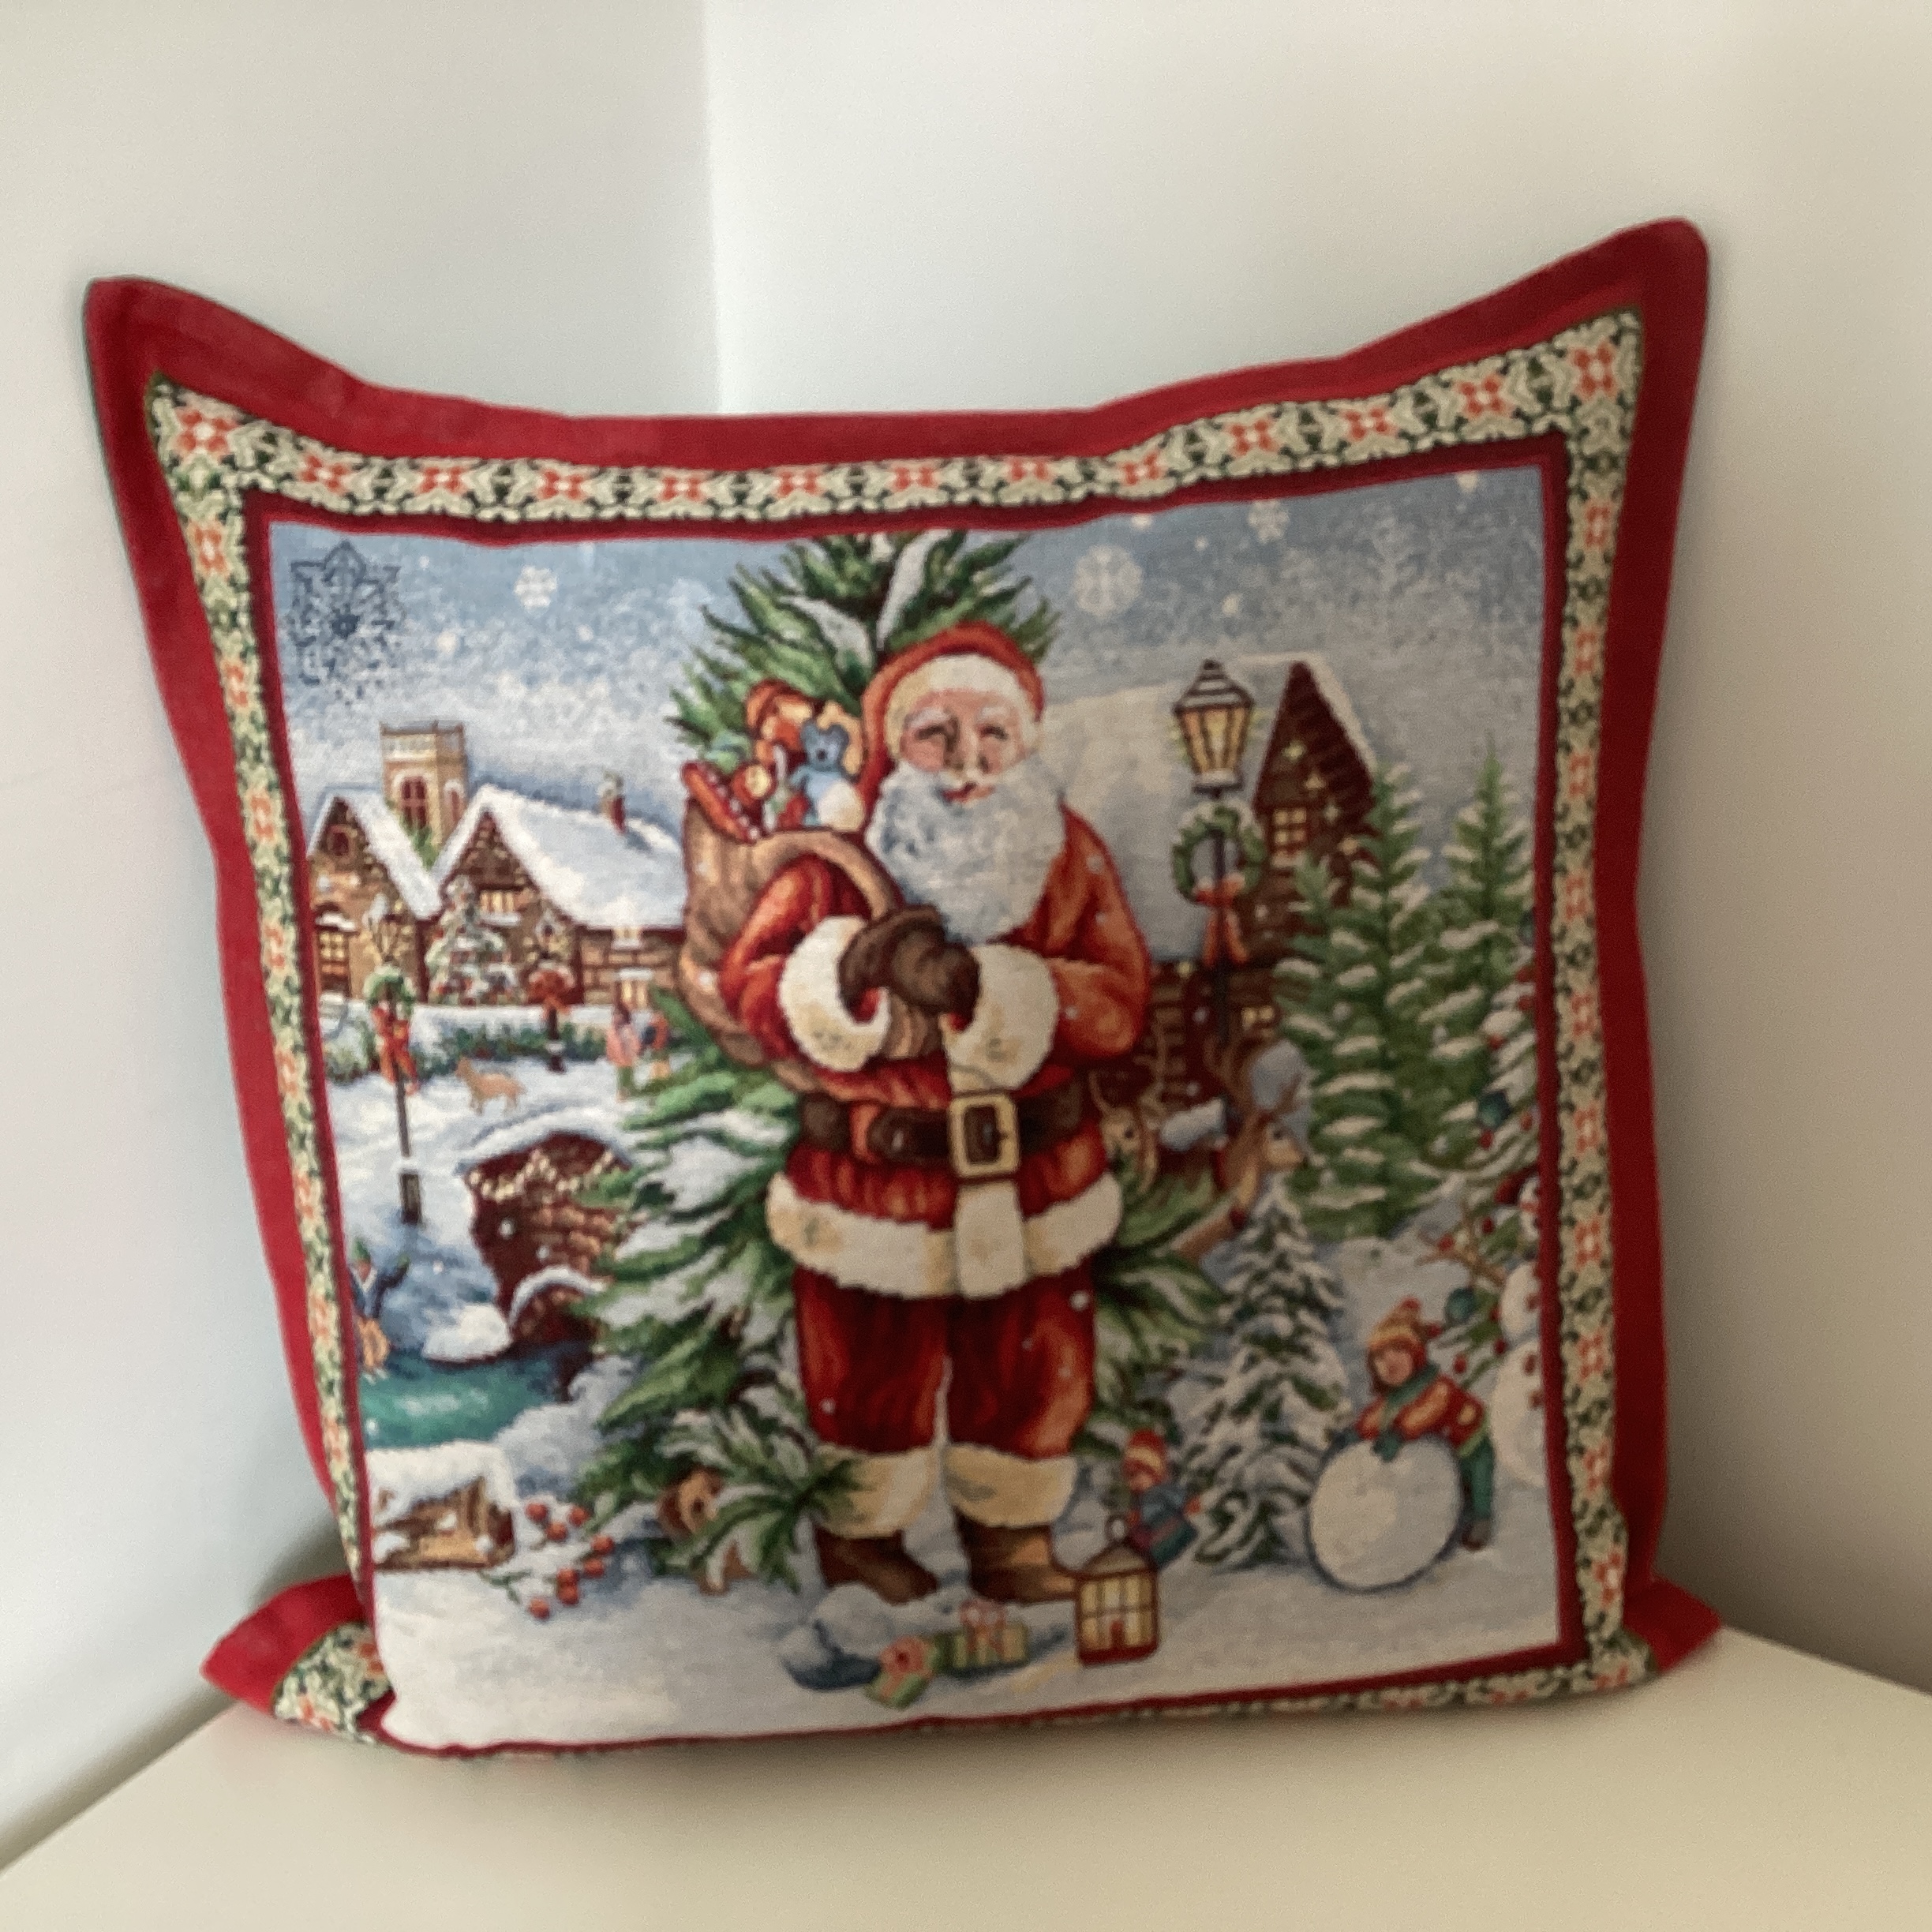 Christmas Cushion - Father Christmas in winter scene